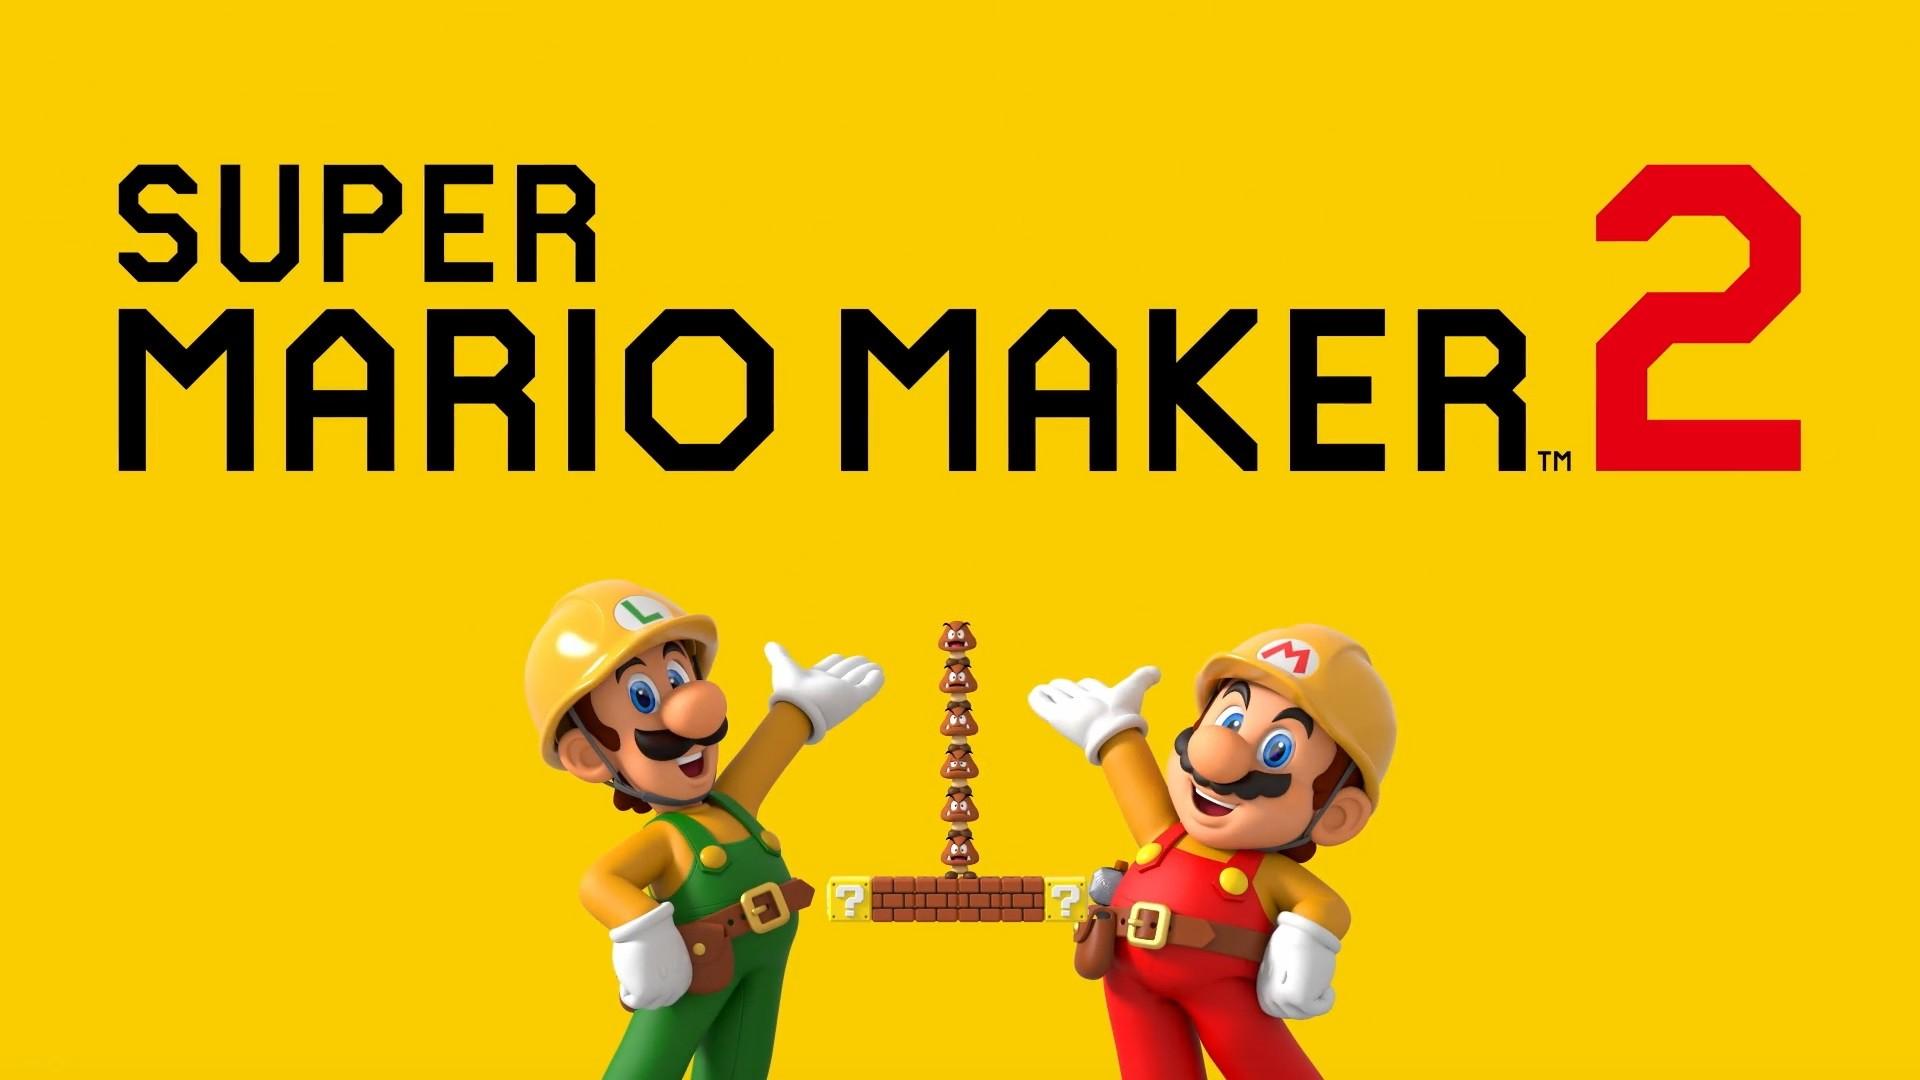 Nintendo reveals story mode and multiplayer support for Super Mario